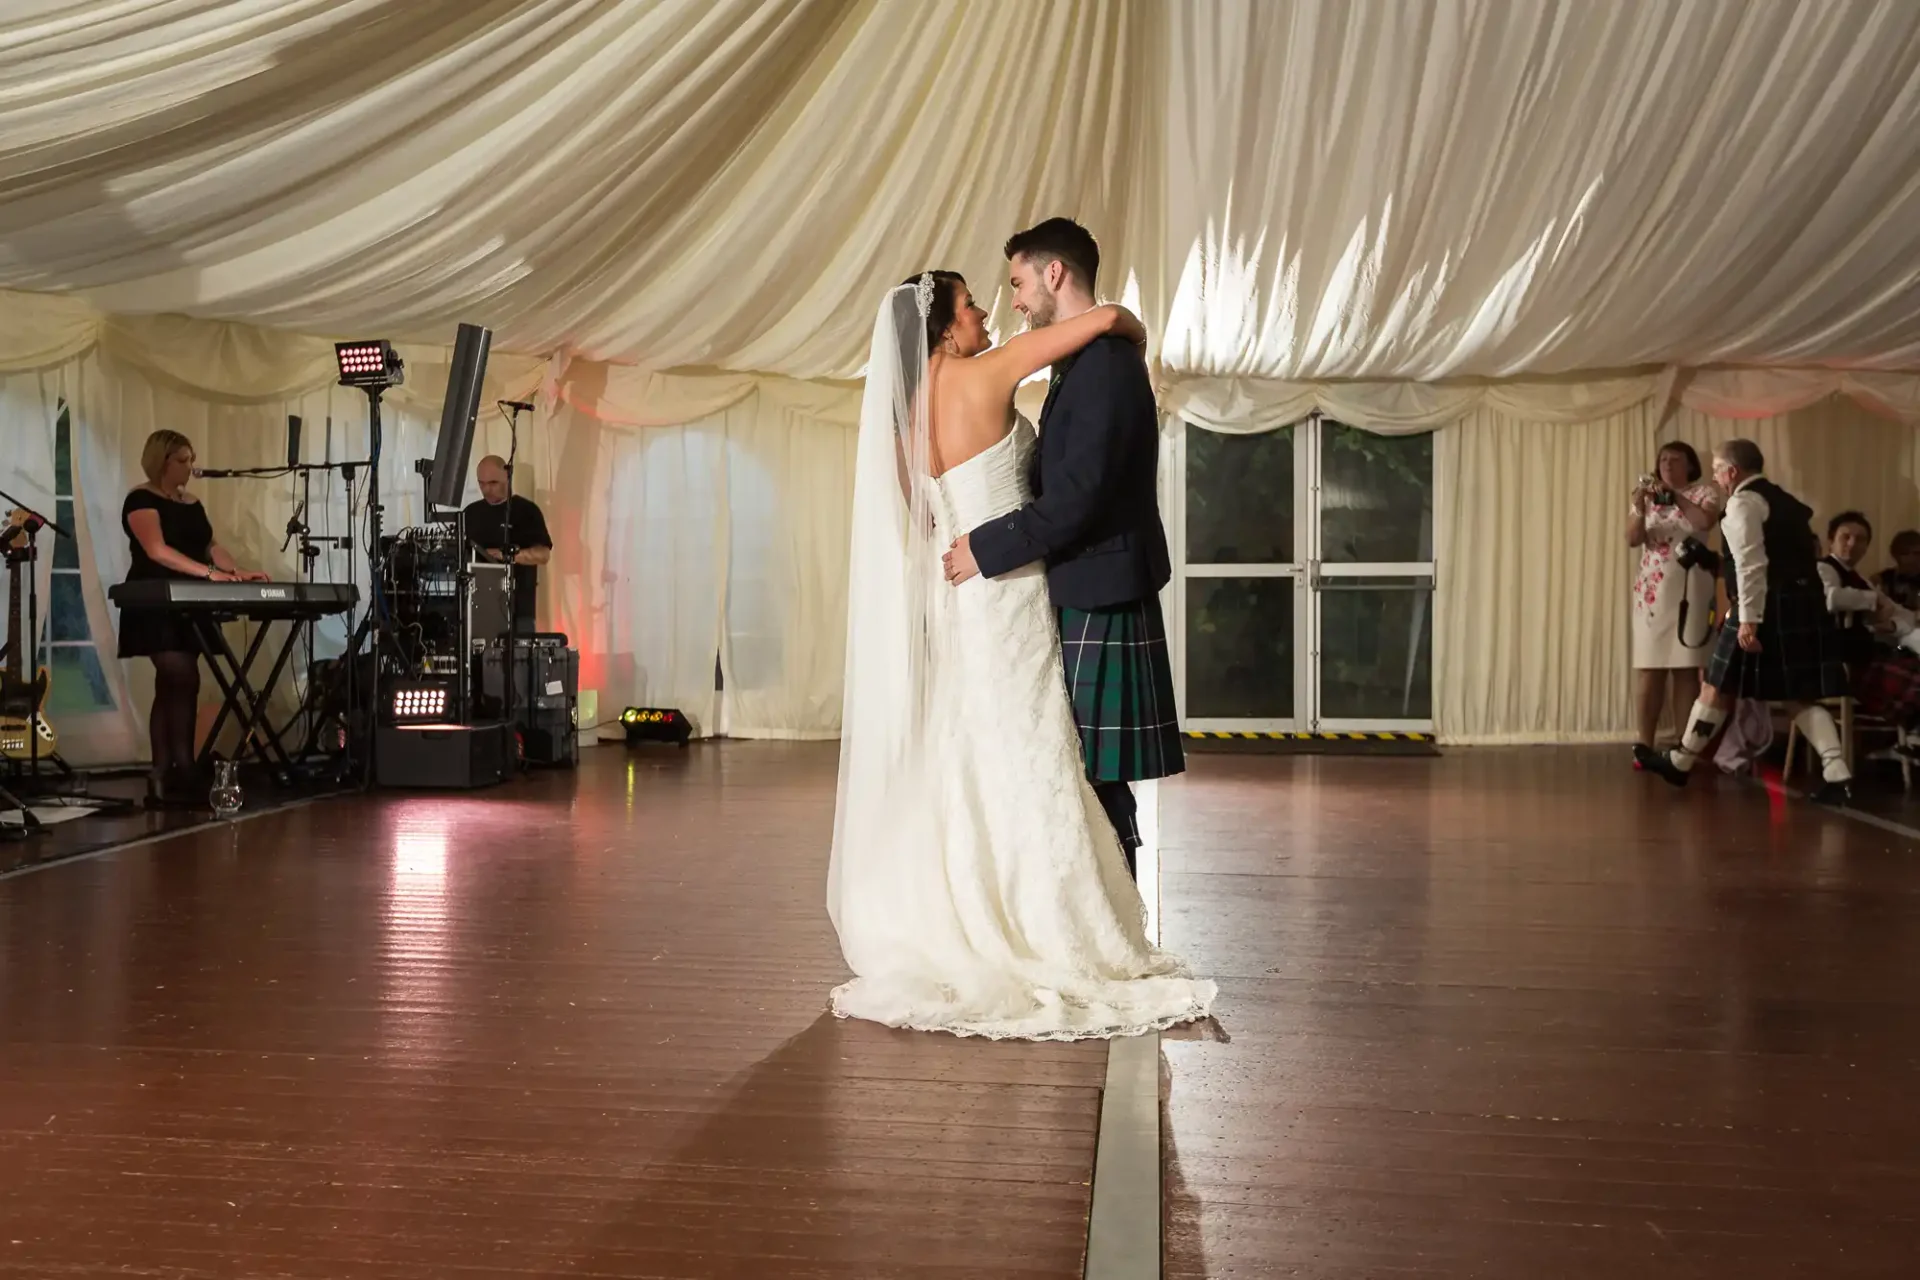 A bride in a white gown and a groom in a kilt embrace while dancing in a marquee, with a live band and guests in the background.